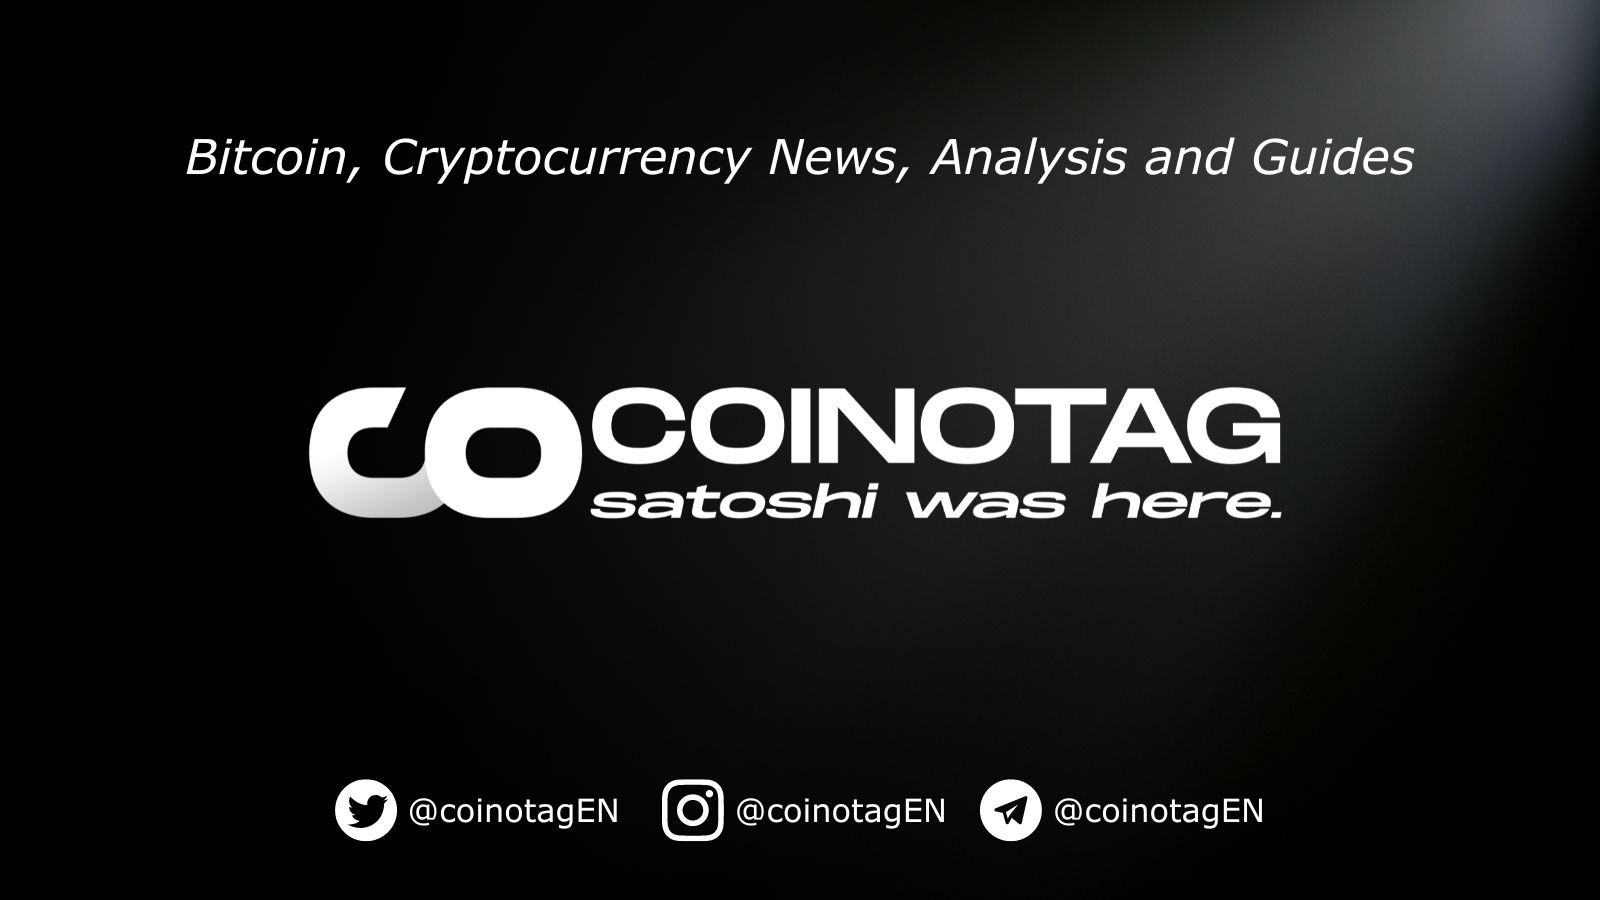 Before you reading,Don`t miss coins like PEPE again! Click here to find new PEPEs! Bitcoin investor loses $68 million due to “address poisoning”. Blockchain detective ZachXBT sheds light on the heist that occurred on May 3rd. The attacker has yet to move the sto... Read the full article for FREE at COINOTAG!